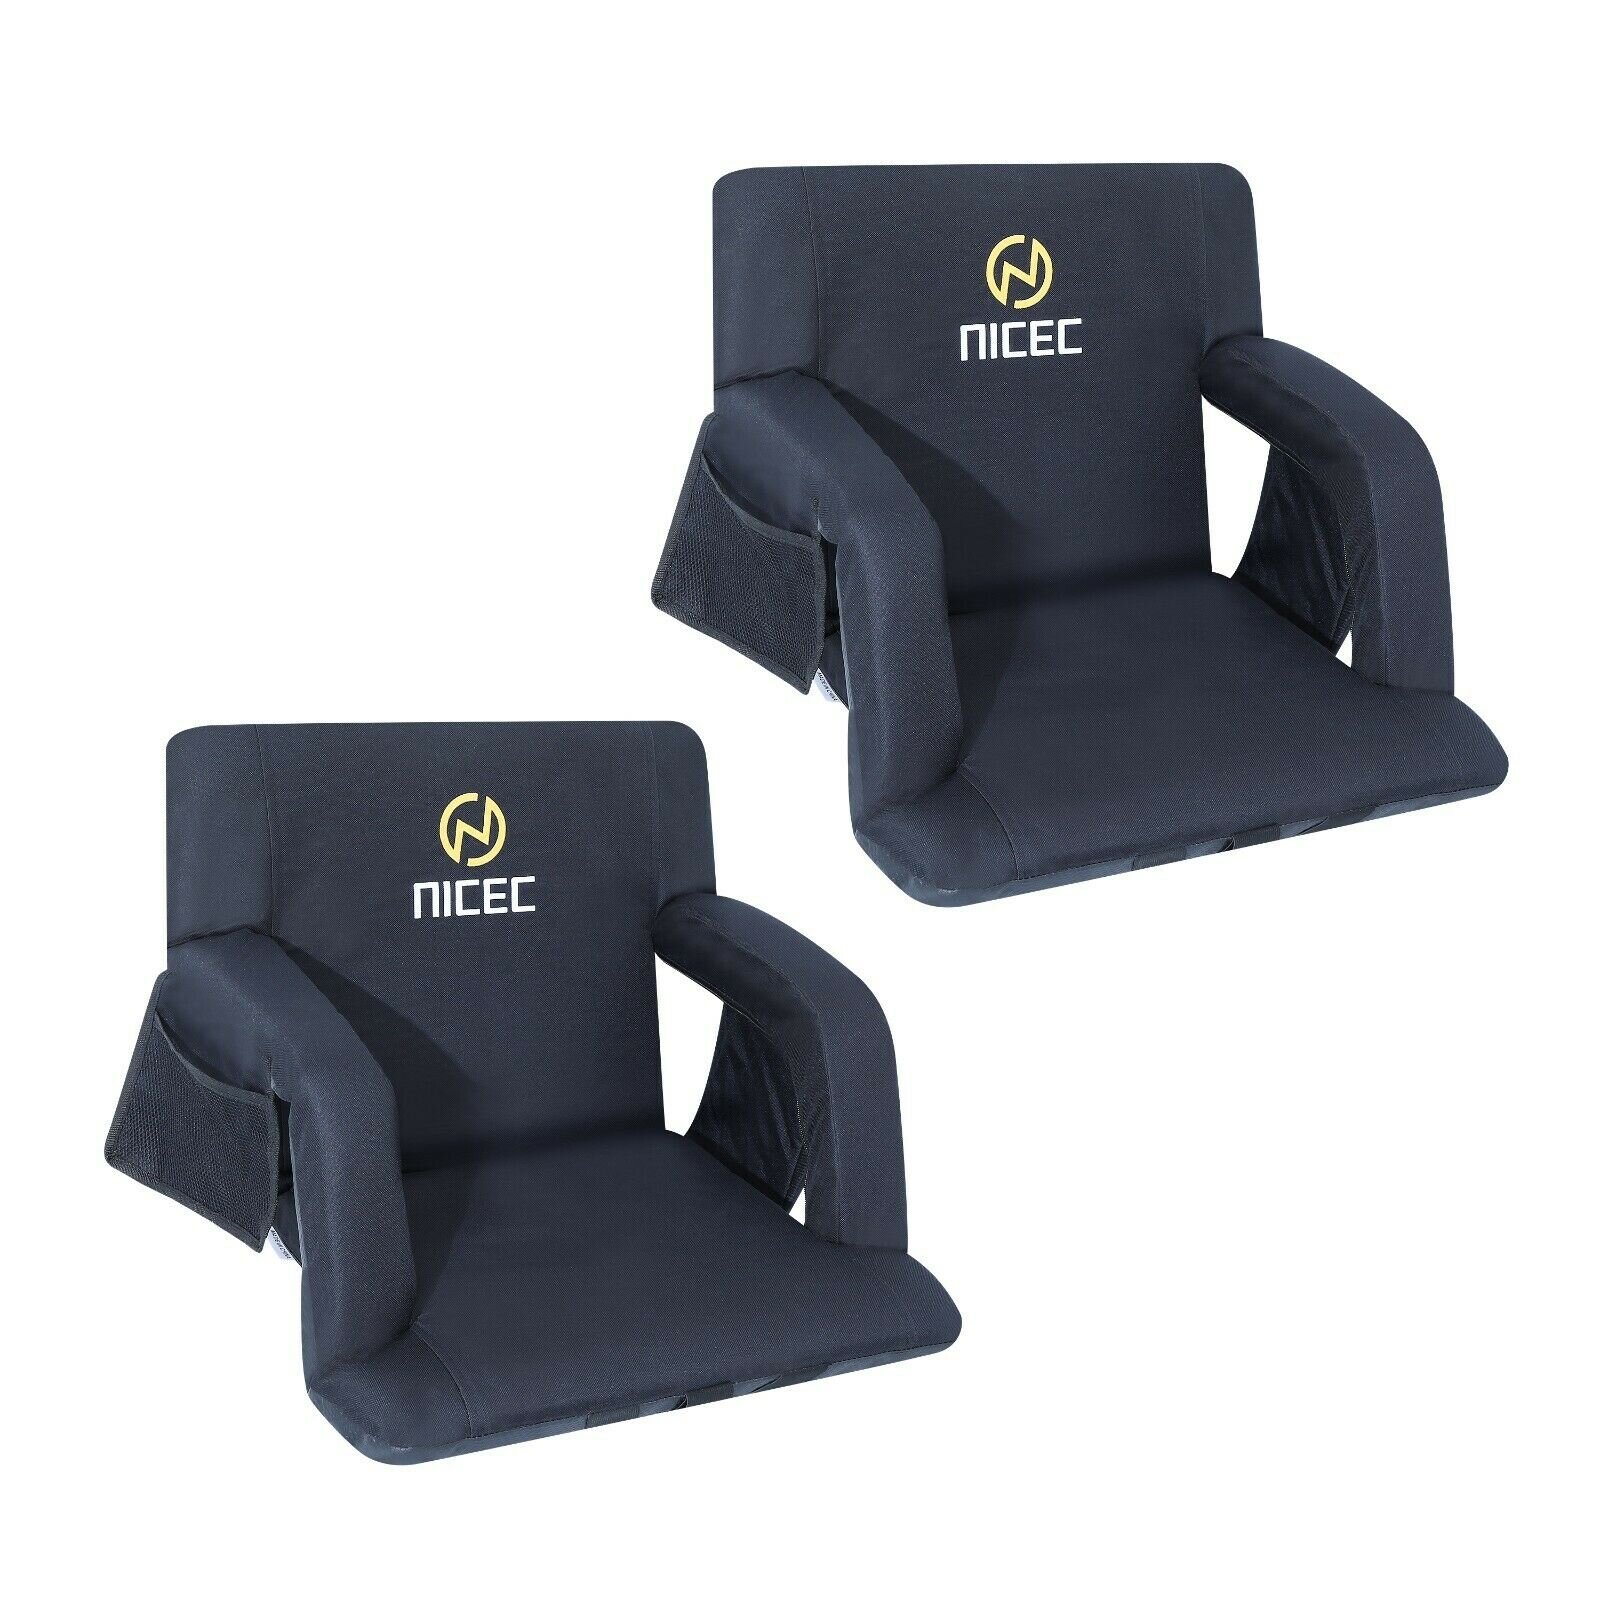 Stadium Seat For Bleachers With Padded Cushion (1 or 2 Pack) in 2023